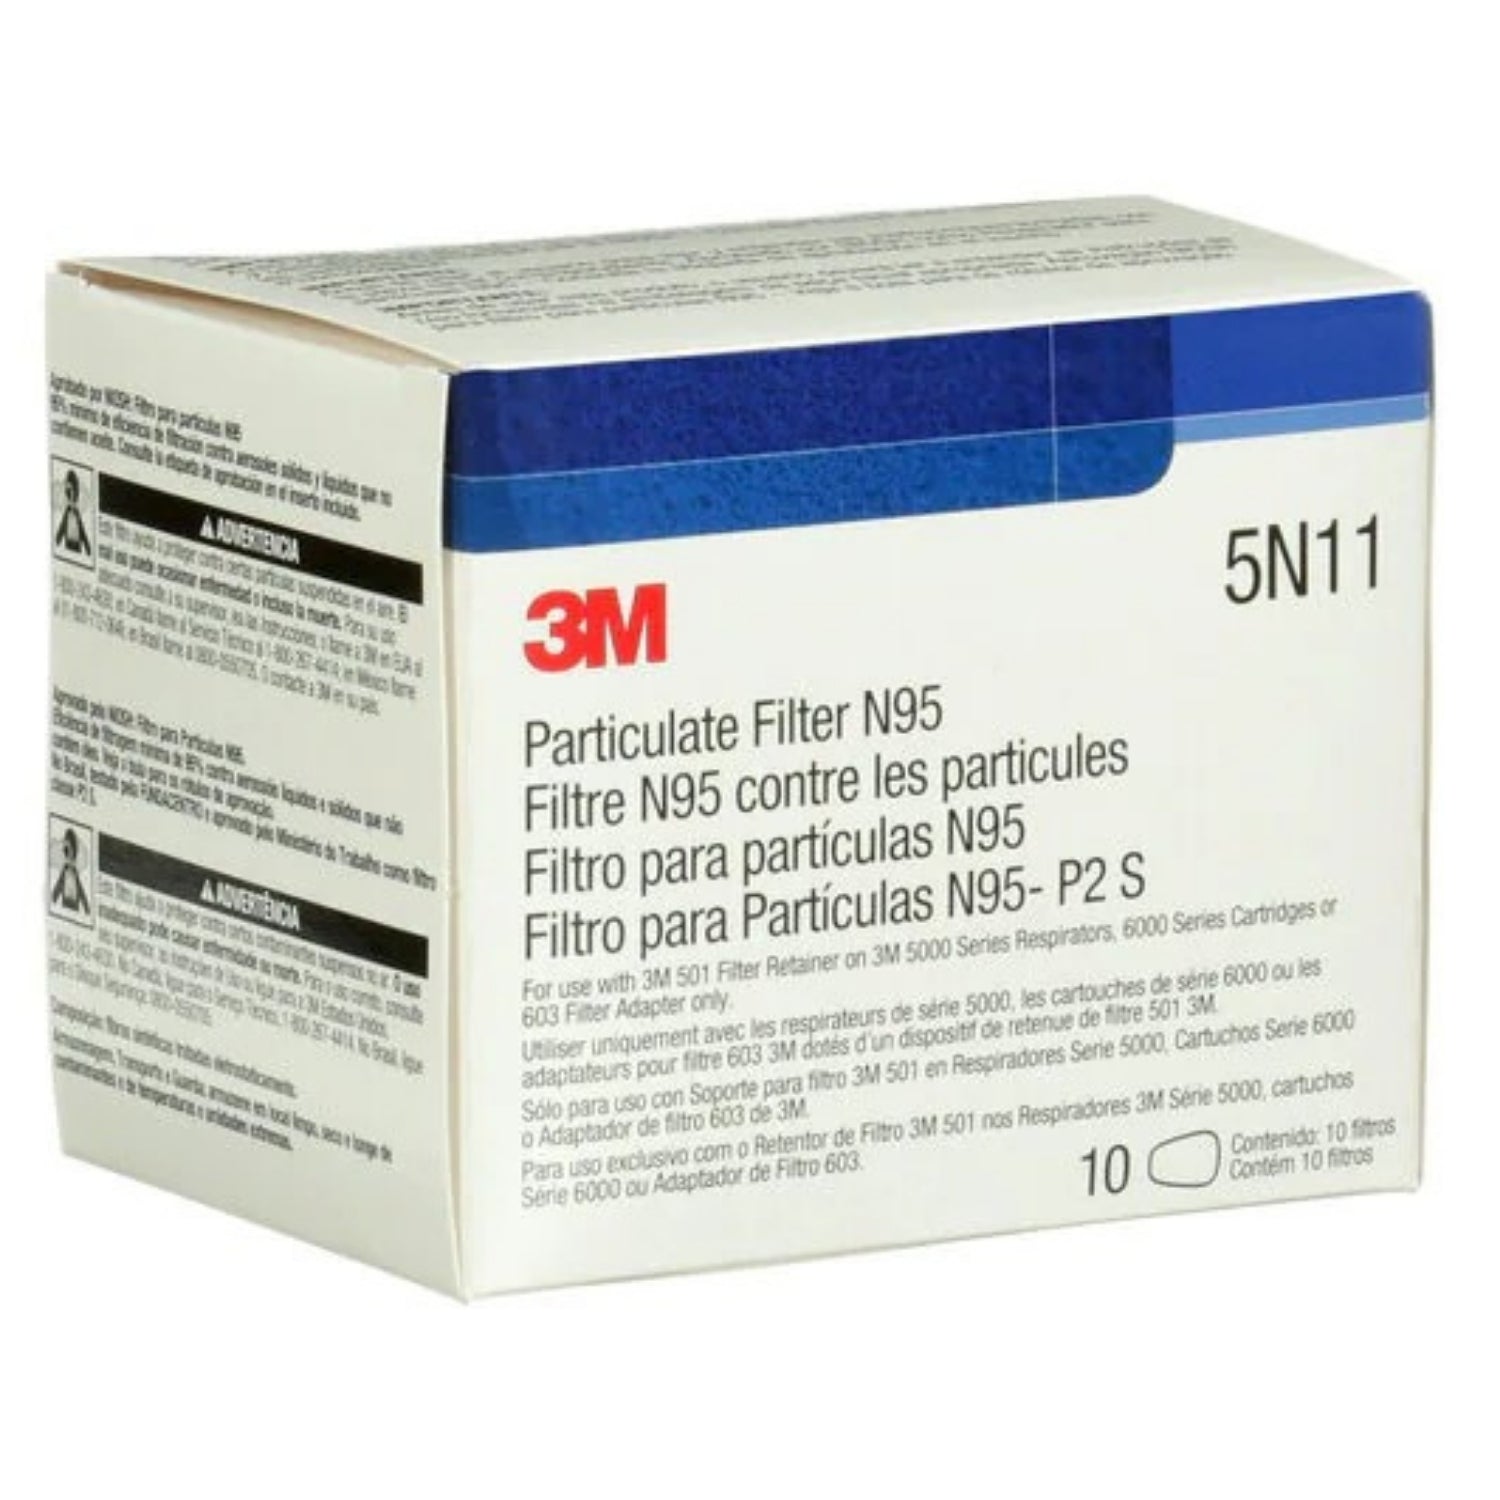 3M™ Particulate Filter 5N11, N95 100 - Non-Oil Based Particles